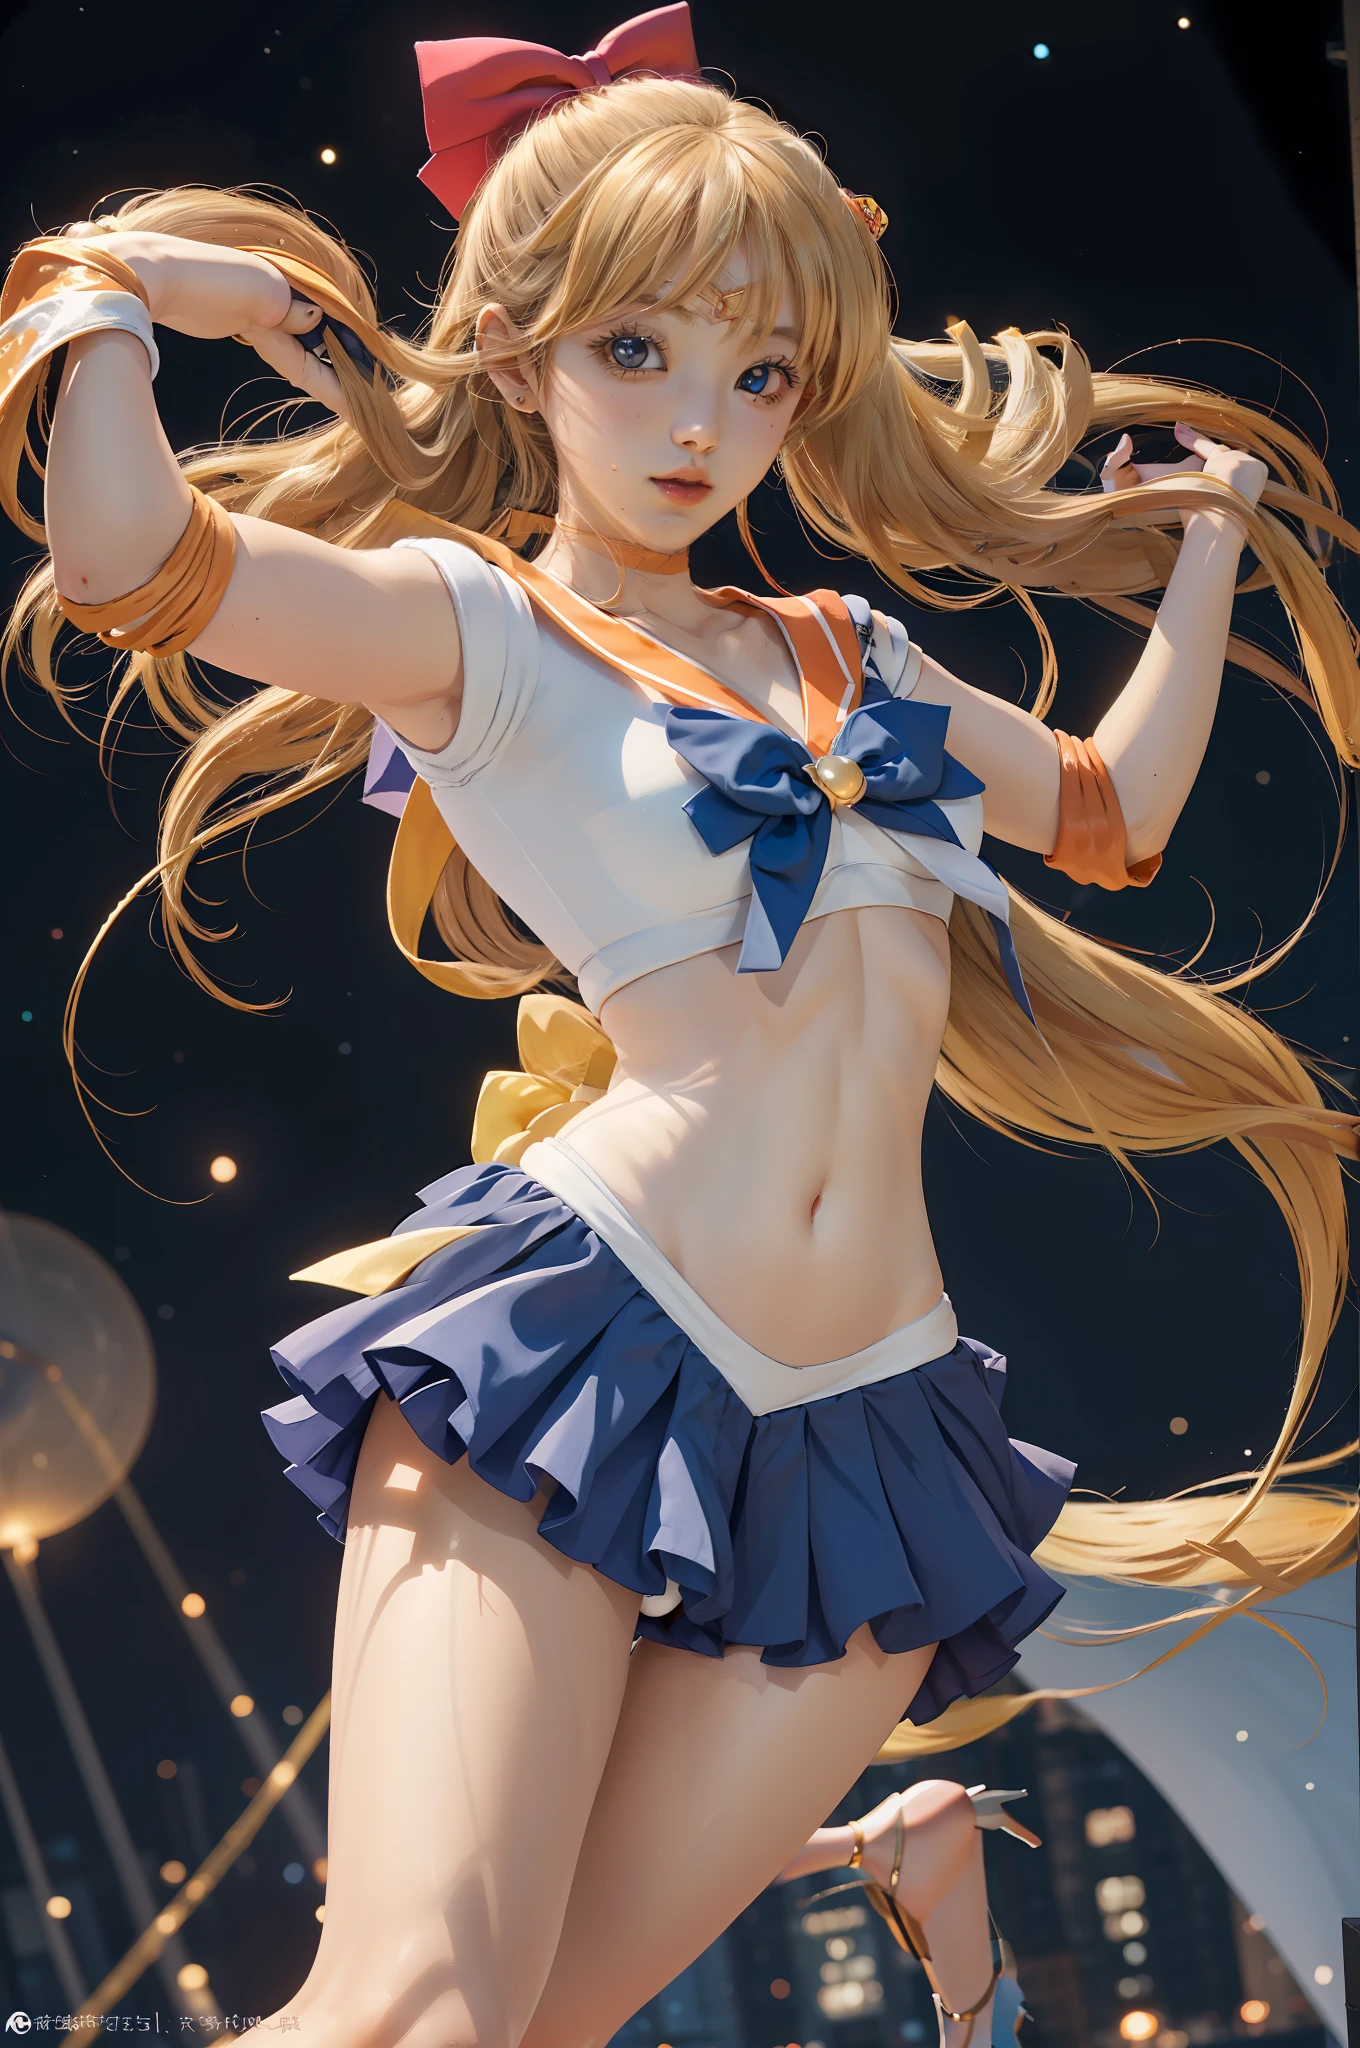 high-level image quality、Sailor Venus Costume、orange colors、Large ribbon on the chest of Sailor Venus、Photo,White panty、Orange high heels for Sailor Venus、rialistic photo、An ultra-high picture quality、Panties showing off a rolled up skirt、ｒBeautiful armpits、Beautiful white panties、Live-action quality、Crotch wide open、I can see my panties.、Beautiful facial features、beautiful thigh、Ultra ailorvenus、poneyTail、Spread your crotch wide、a close up of a woman in a costume posing for a picture, White panty、A sexy、Anime girl cosplay, Sailor Moon Style, Anime Cosplay, Beautiful armpits、Beautiful navel、Sailor Moon!! Beautiful, cosplay foto, Cosplay,  Real Photographics, Inspired by Yang J